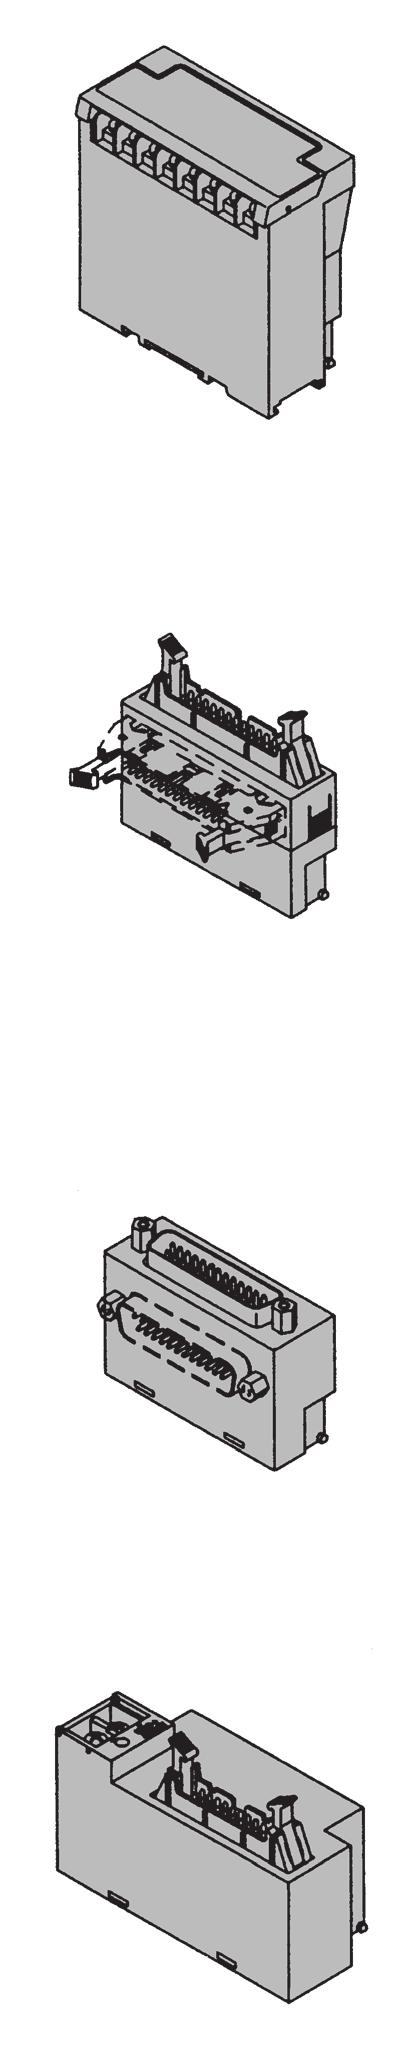 Exploded View of Manifold -VQ000 lug-in Unit: Exploded View (F//J/L/G/S ) Housing assembly and SI unit